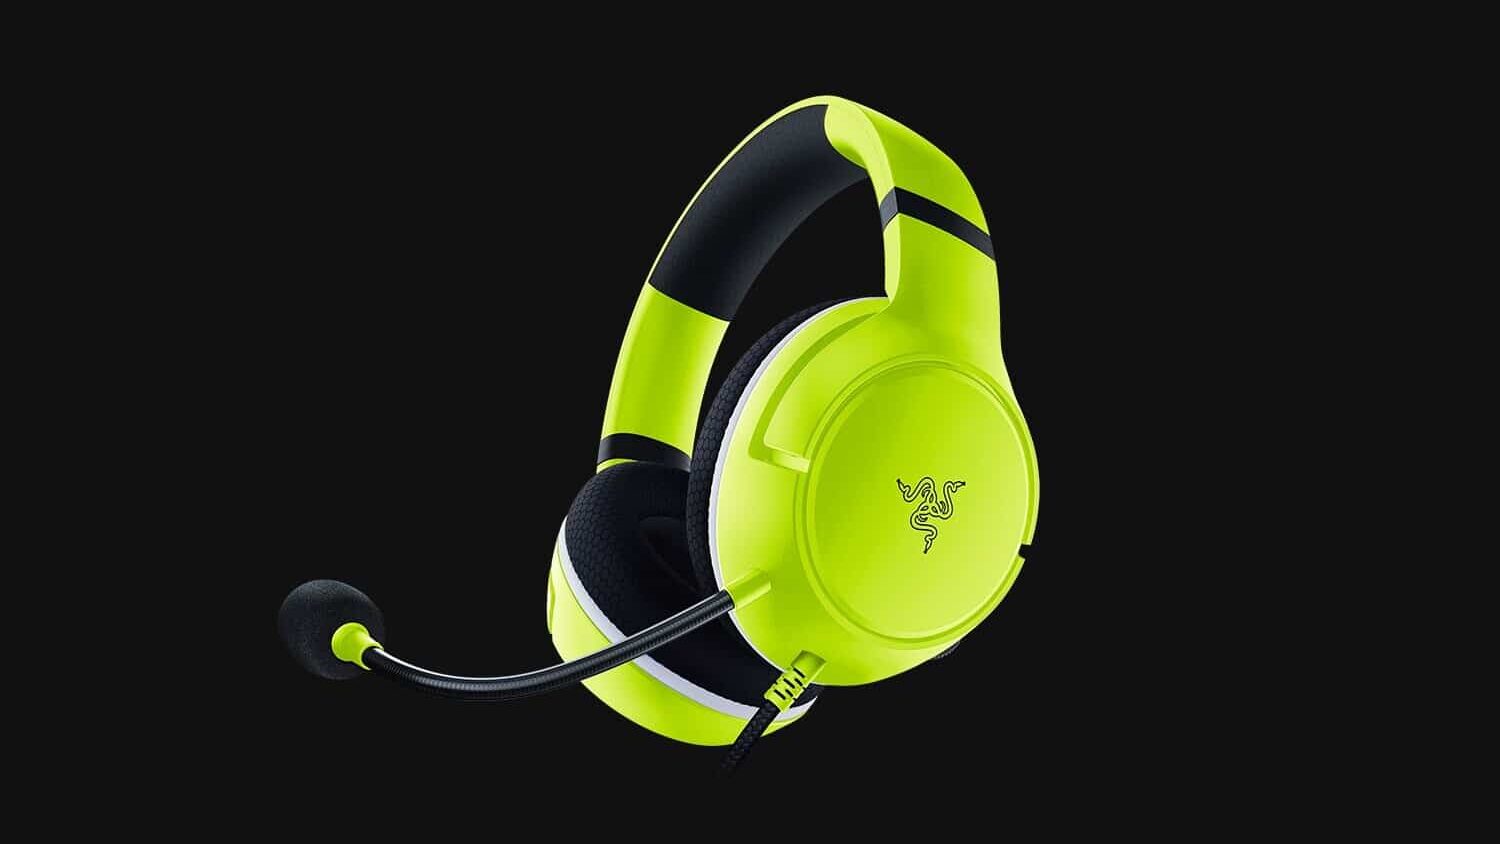 Razer Kaira X for Xbox Wired Gaming Headset - Electric Volt